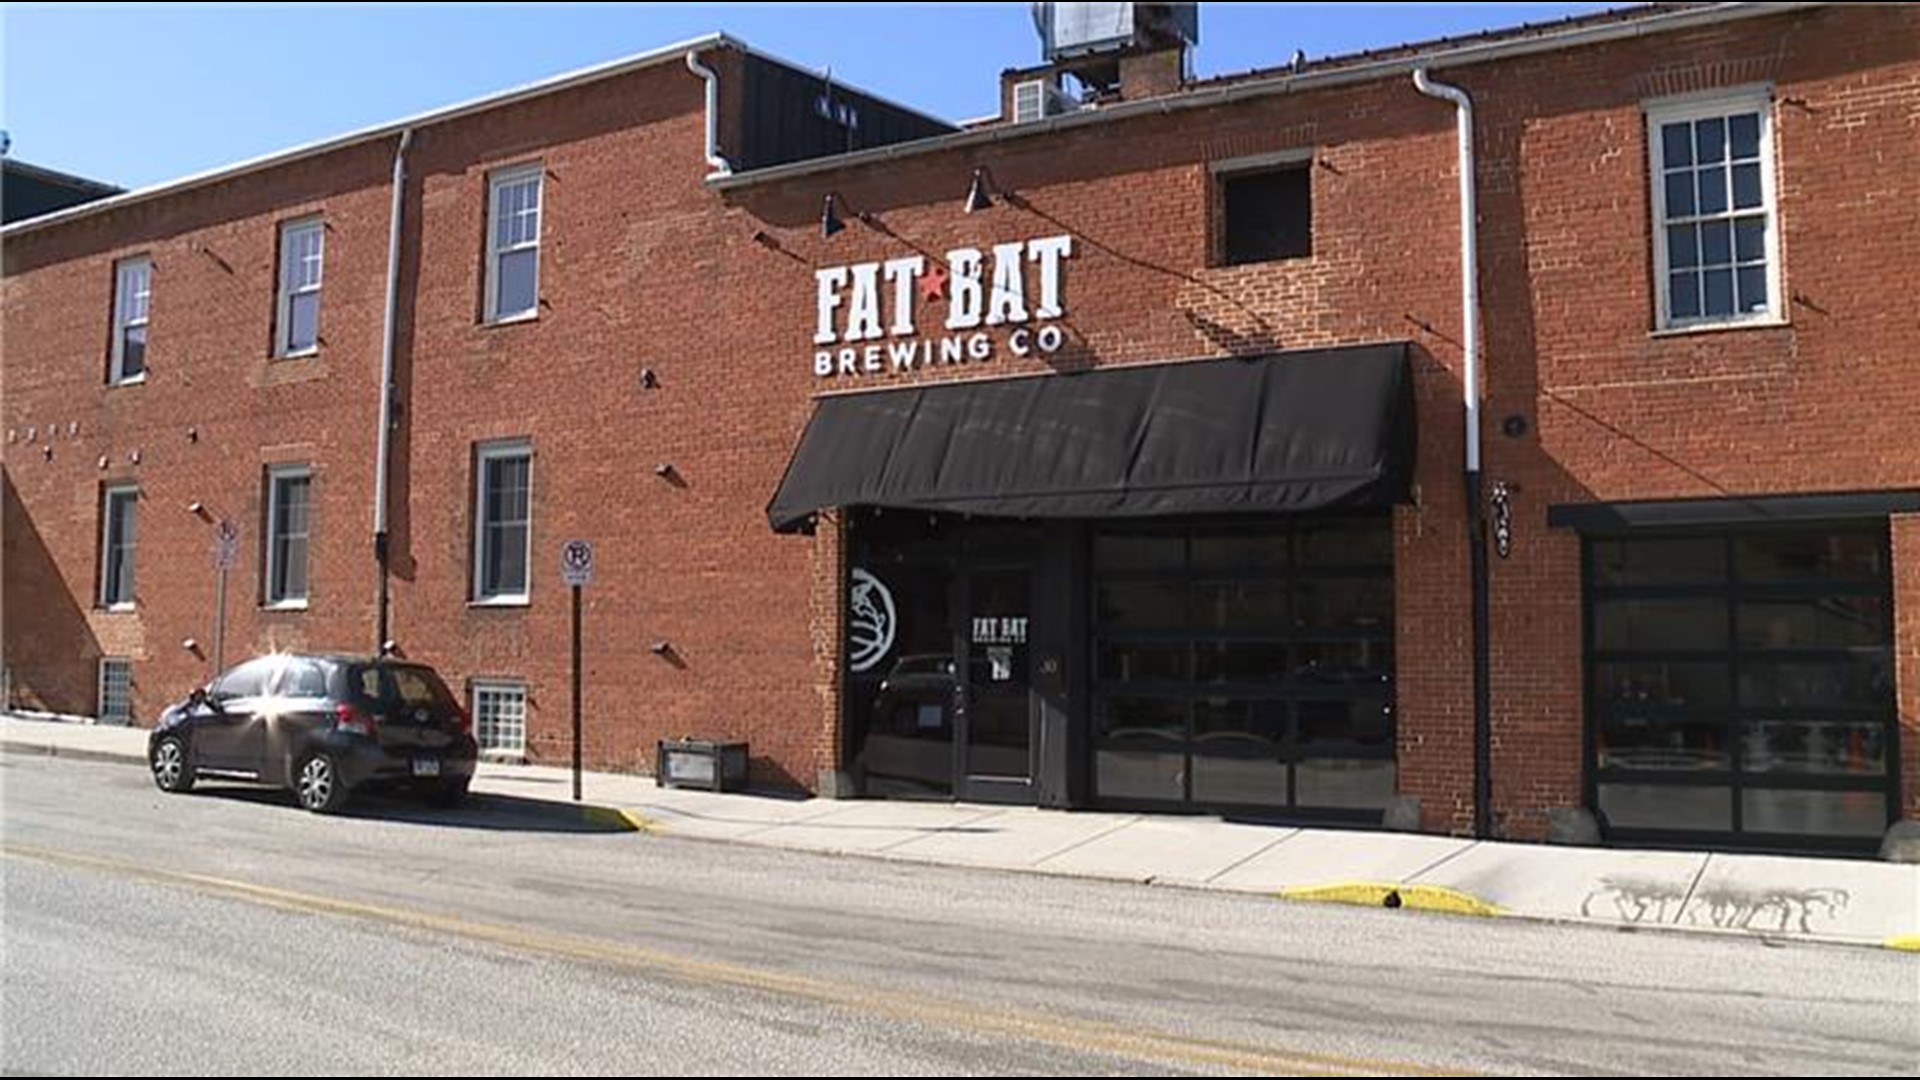 This month, FOX43 highlights local businesses that are paving the way in male-dominated fields. Our second stop is Fat Bat Brewing Company, located in Hanover.